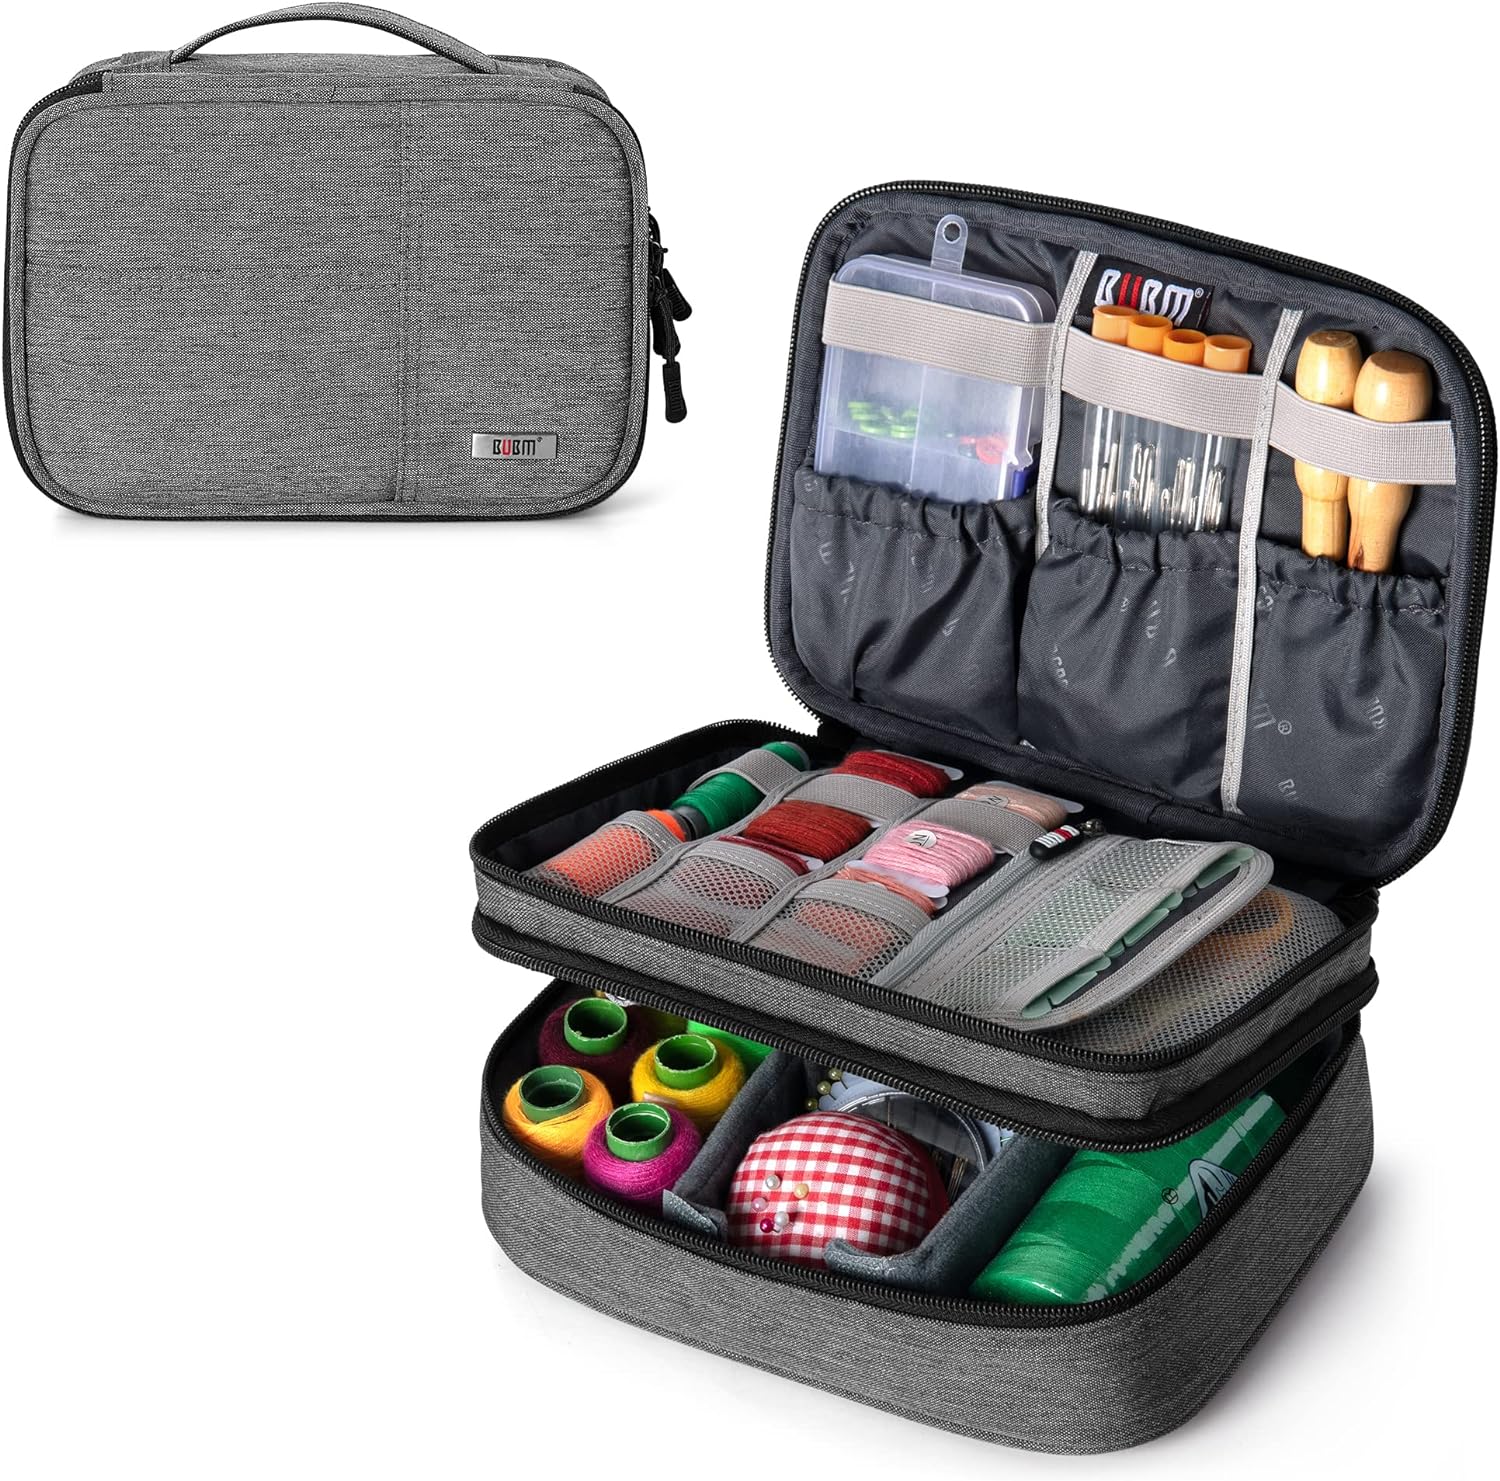 Double Layer Sewing Organizer with Detachable Dividers, Sewing Supplies Organizer for Sewing Kits (Bag ONLY), Denim Gray